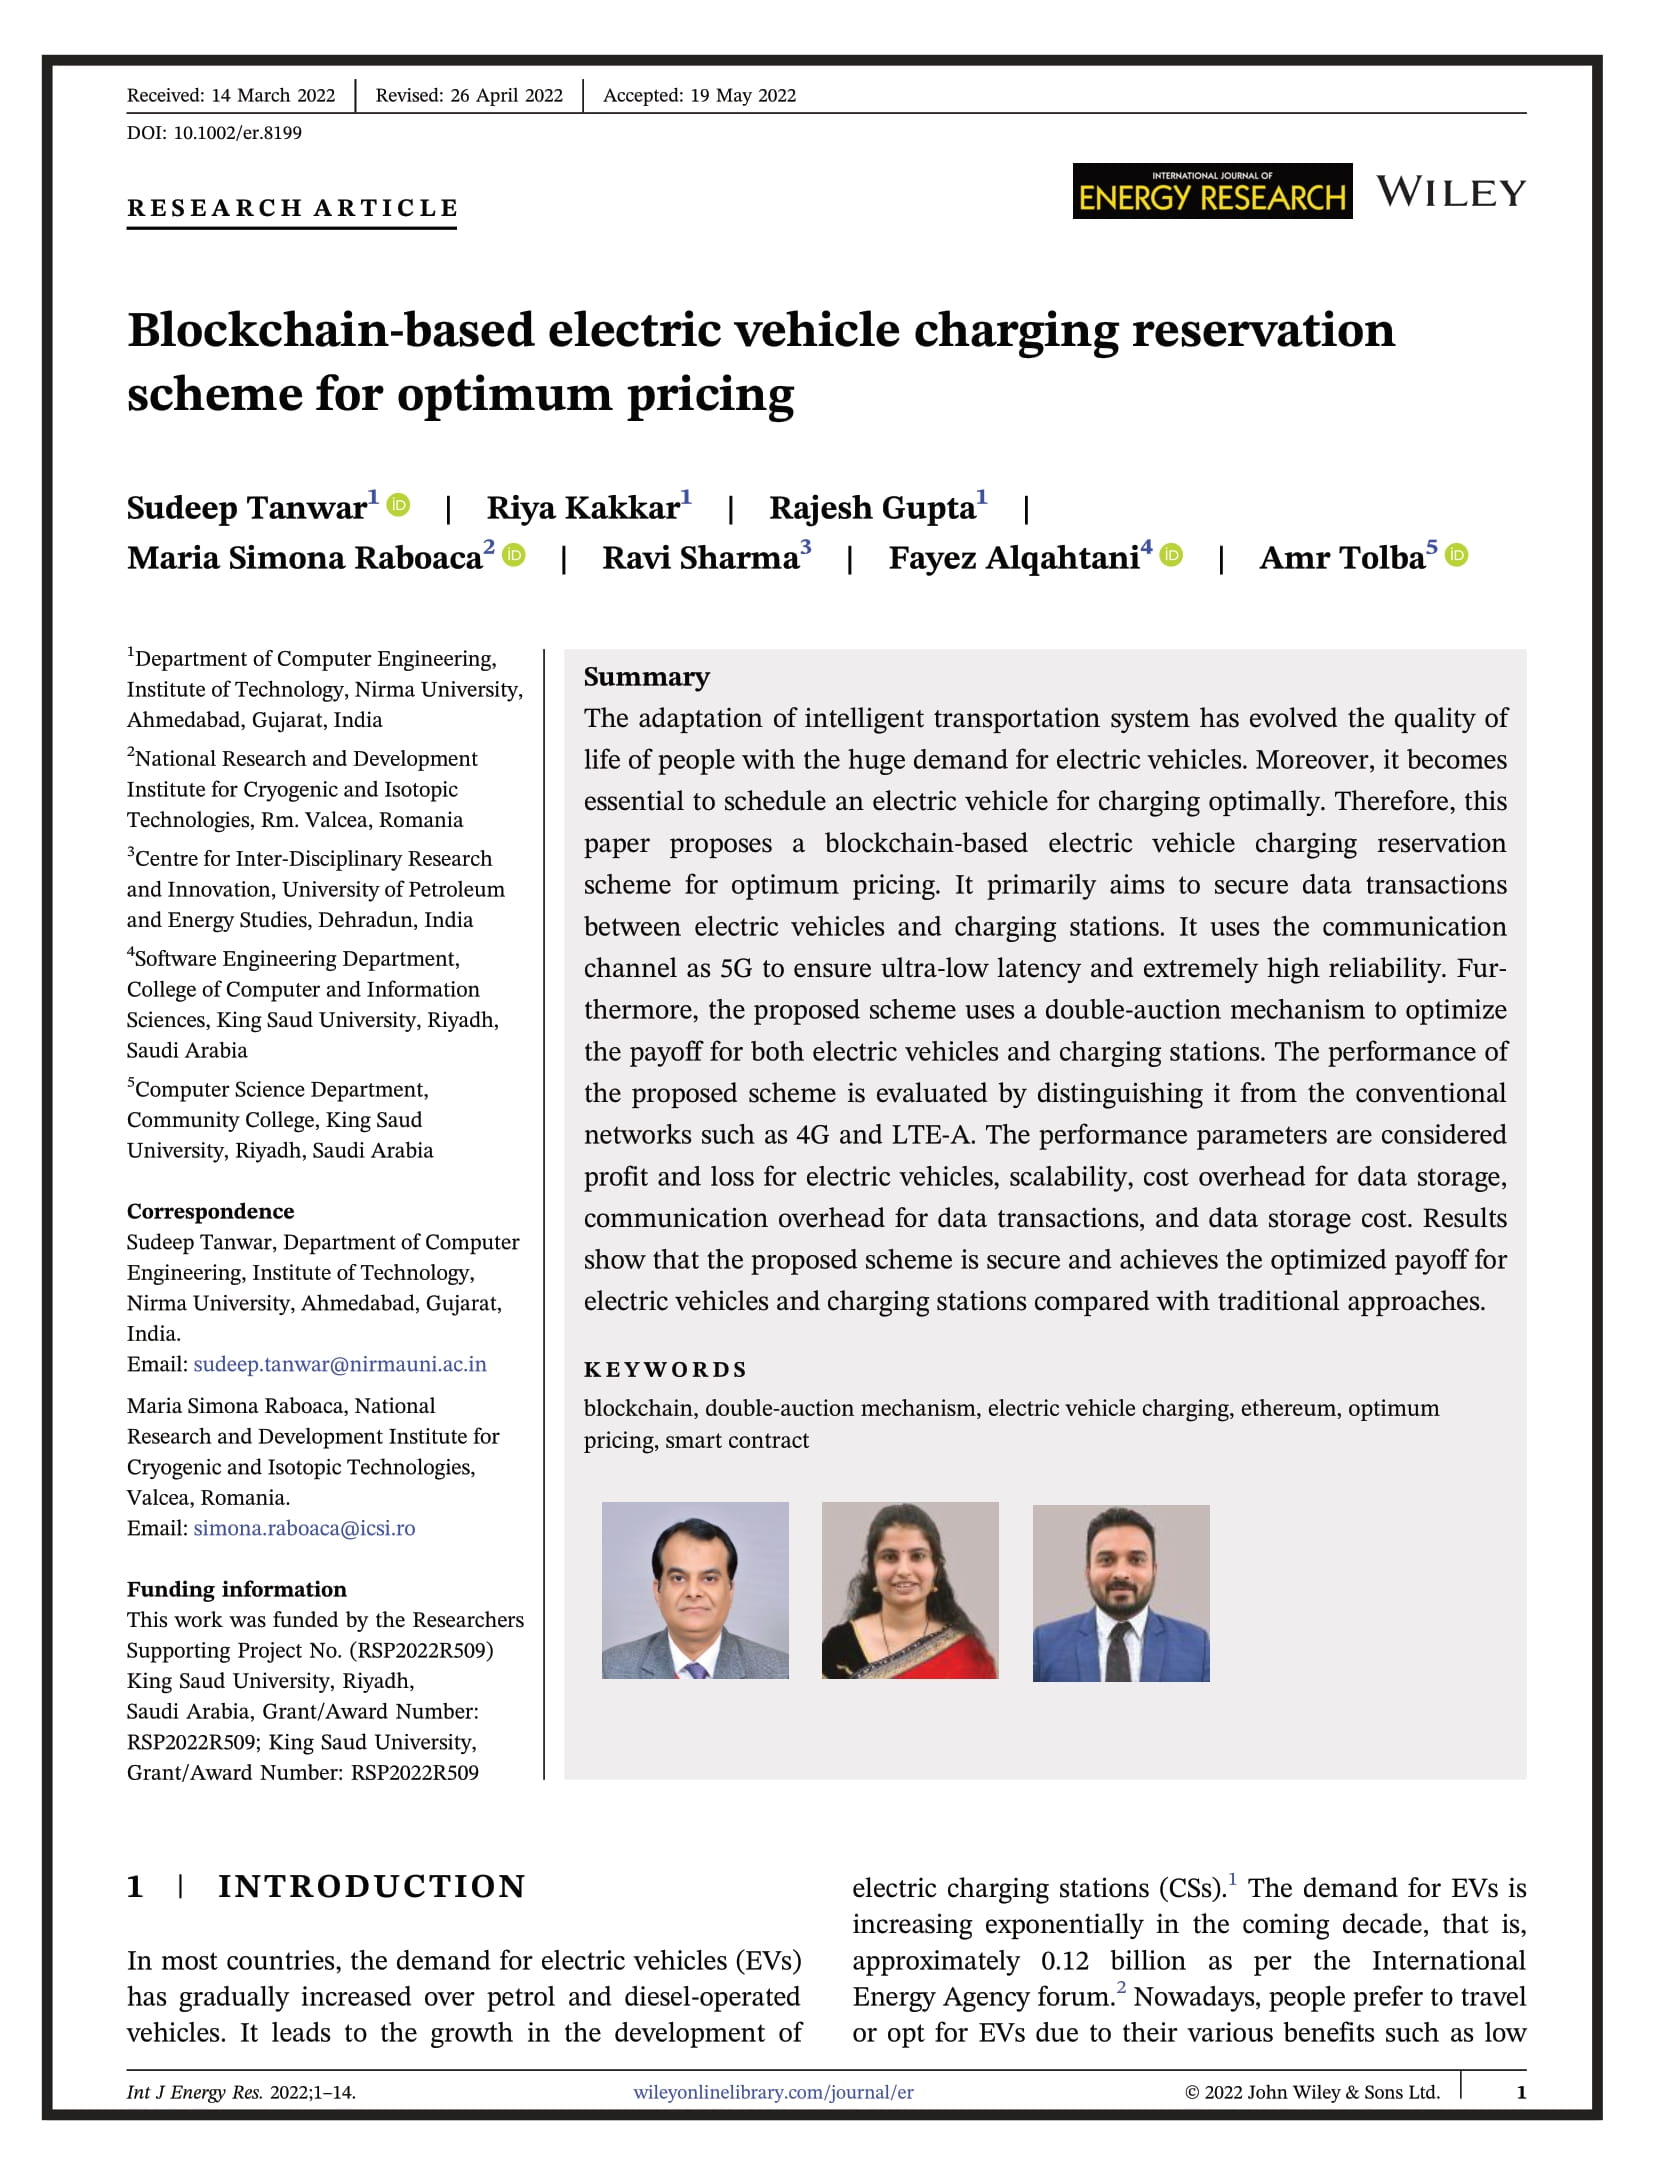 Blockchain-based electric vehicle charging reservation scheme for optimum pricing